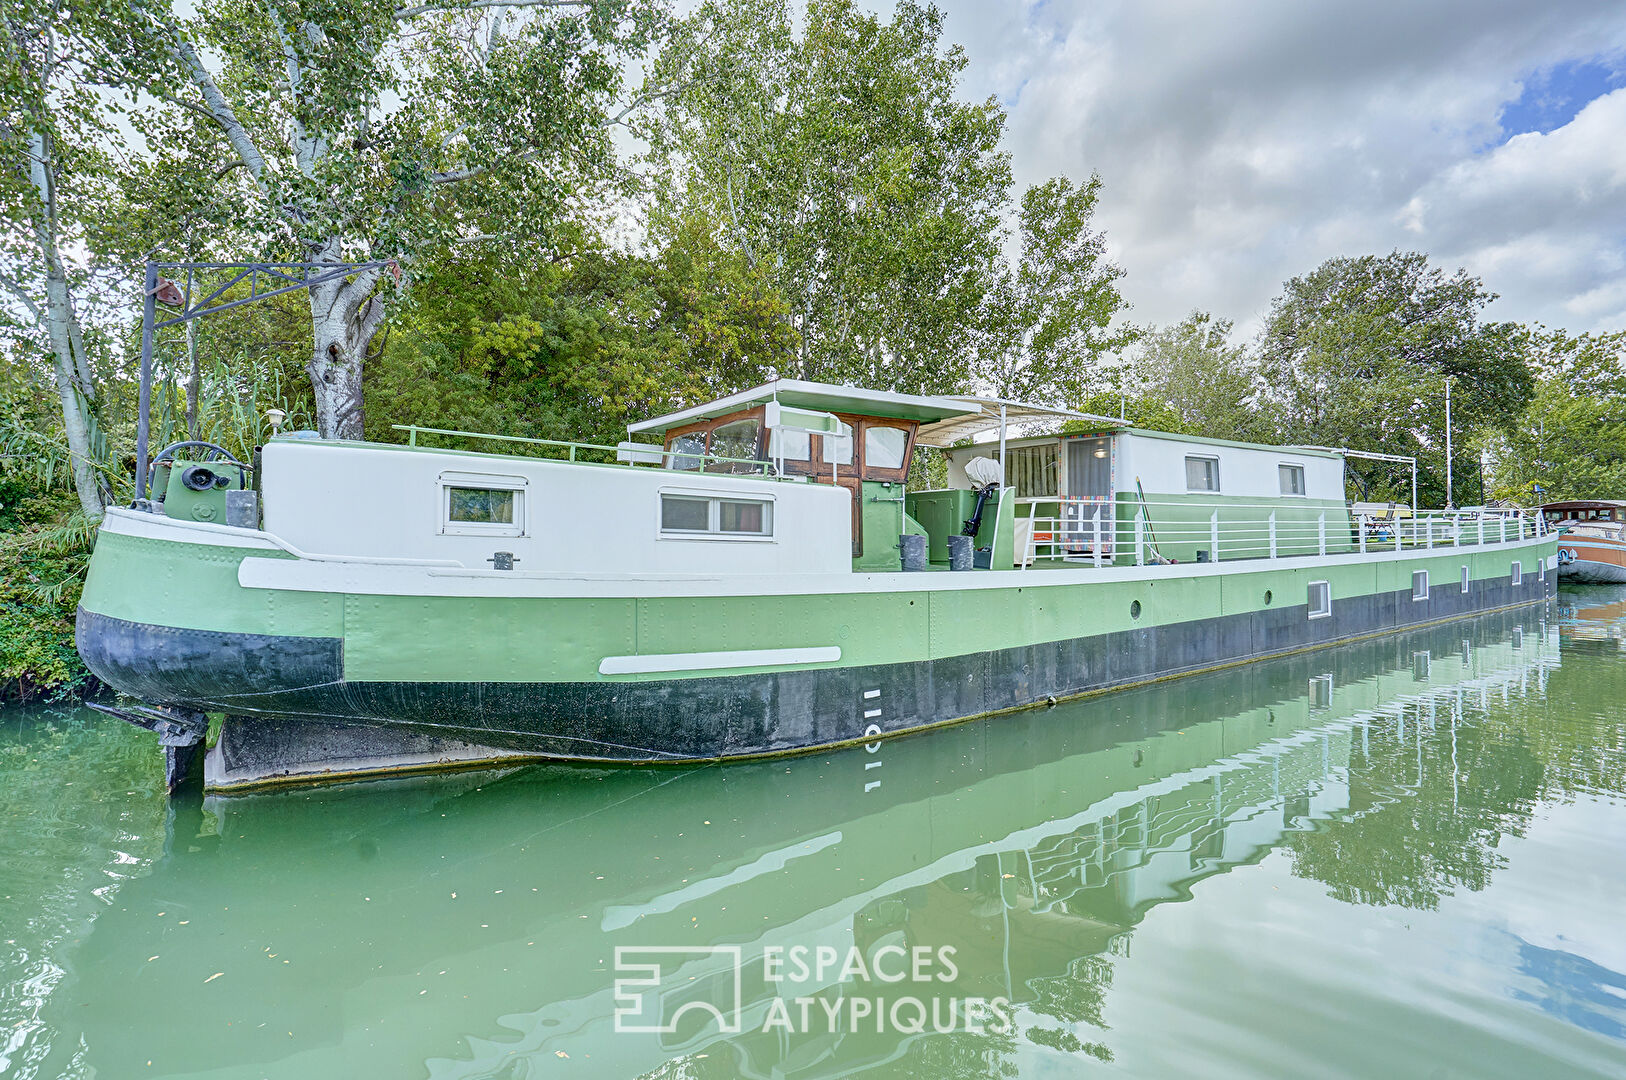 The Saint-Louis, houseboat in the heart of the city